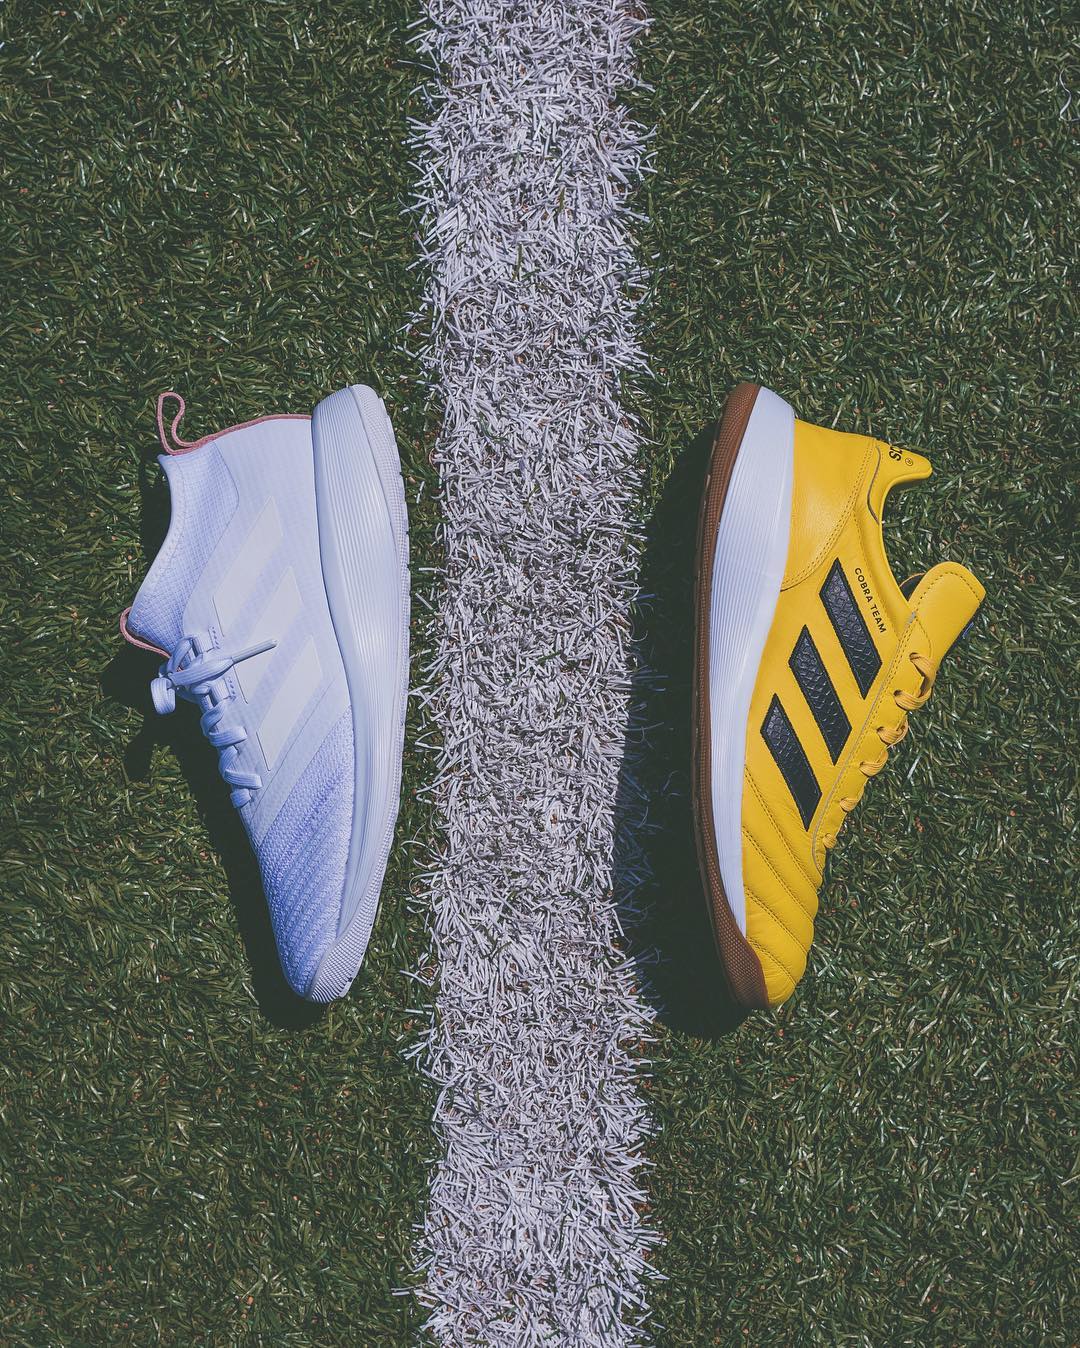 kith-adidas-soccer-collection-2017ss-release-20170602